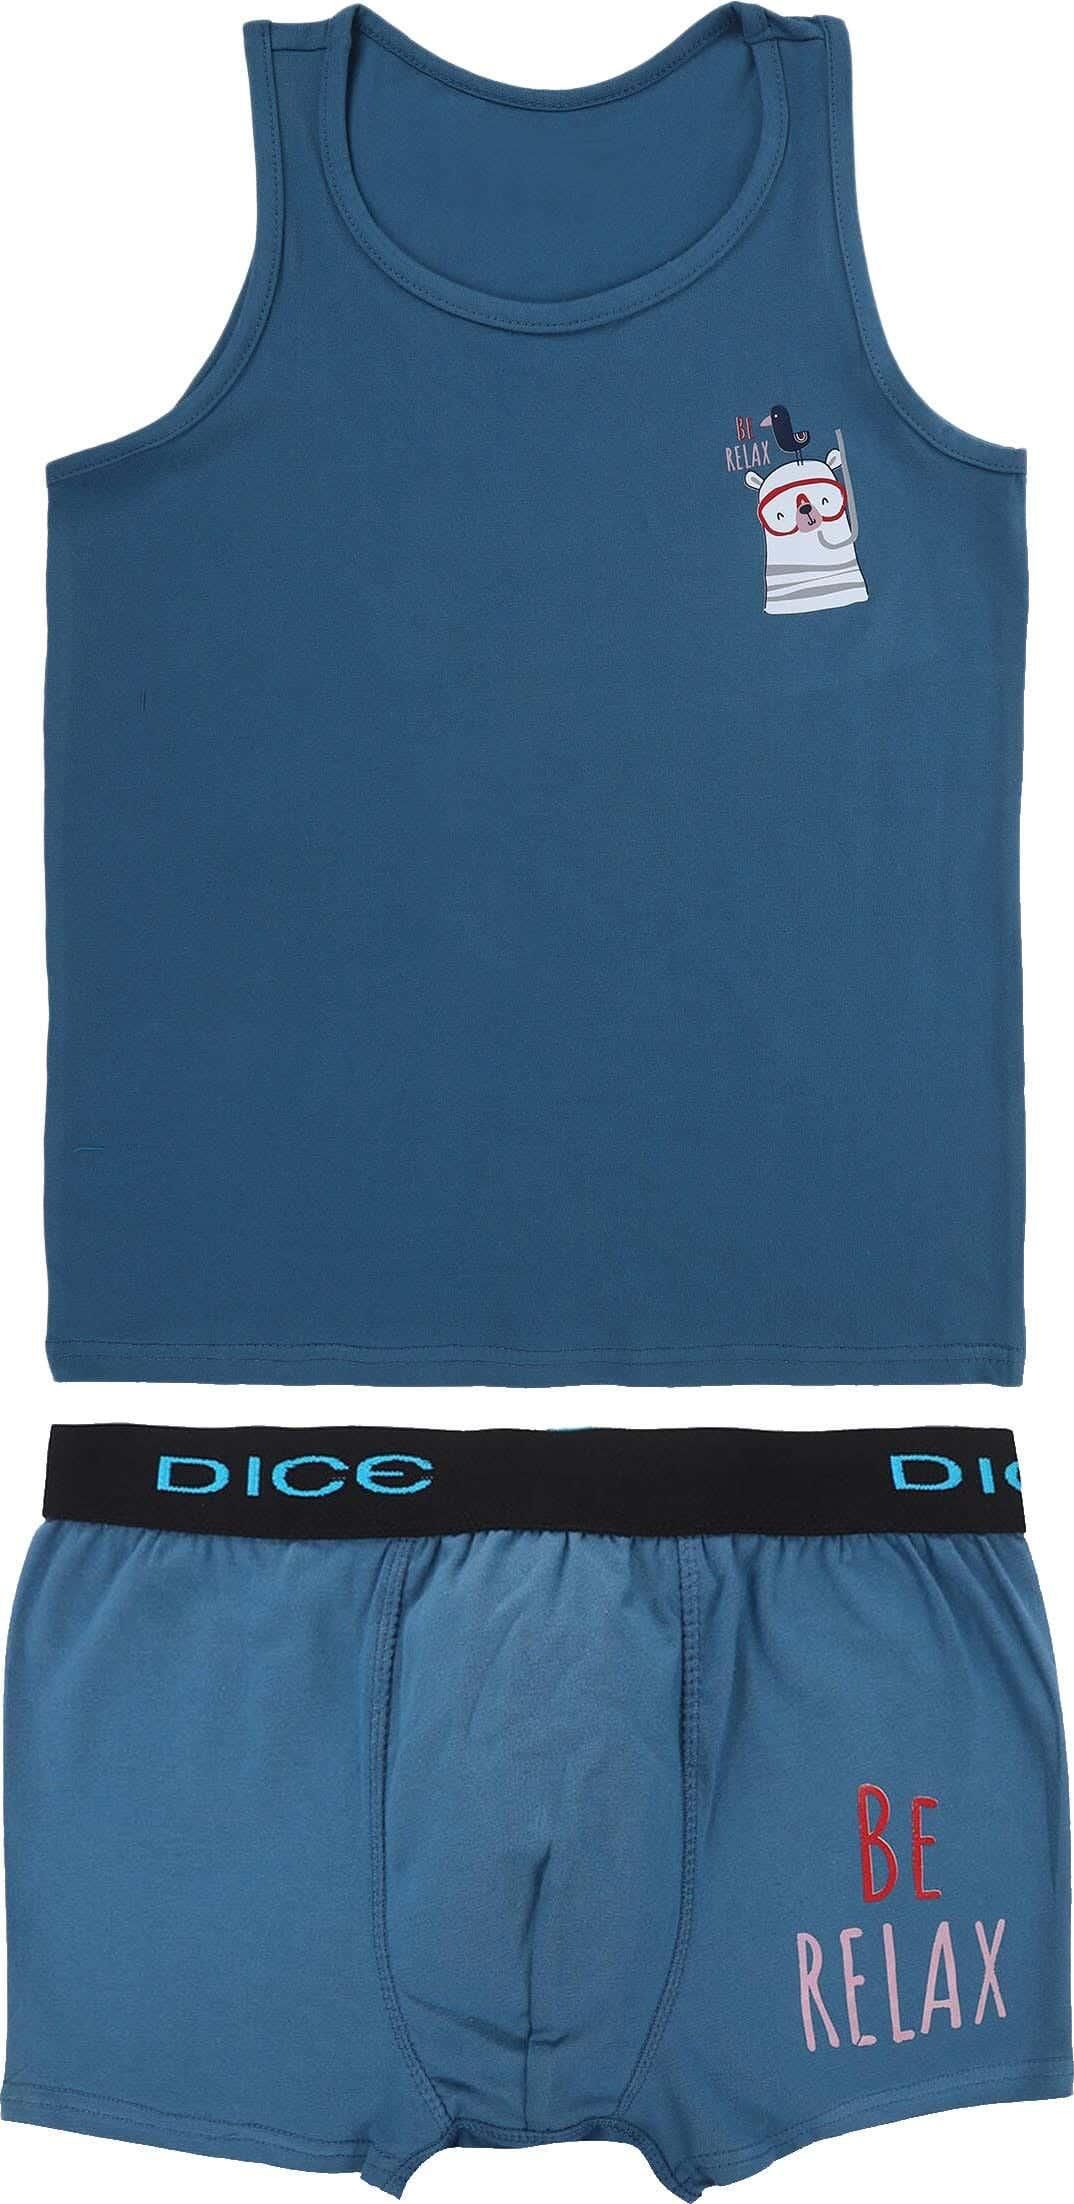 Get Dice Printed Cotton underwear set for Boys, 2 Pieces, size 13/12 - Petrol with best offers | Raneen.com